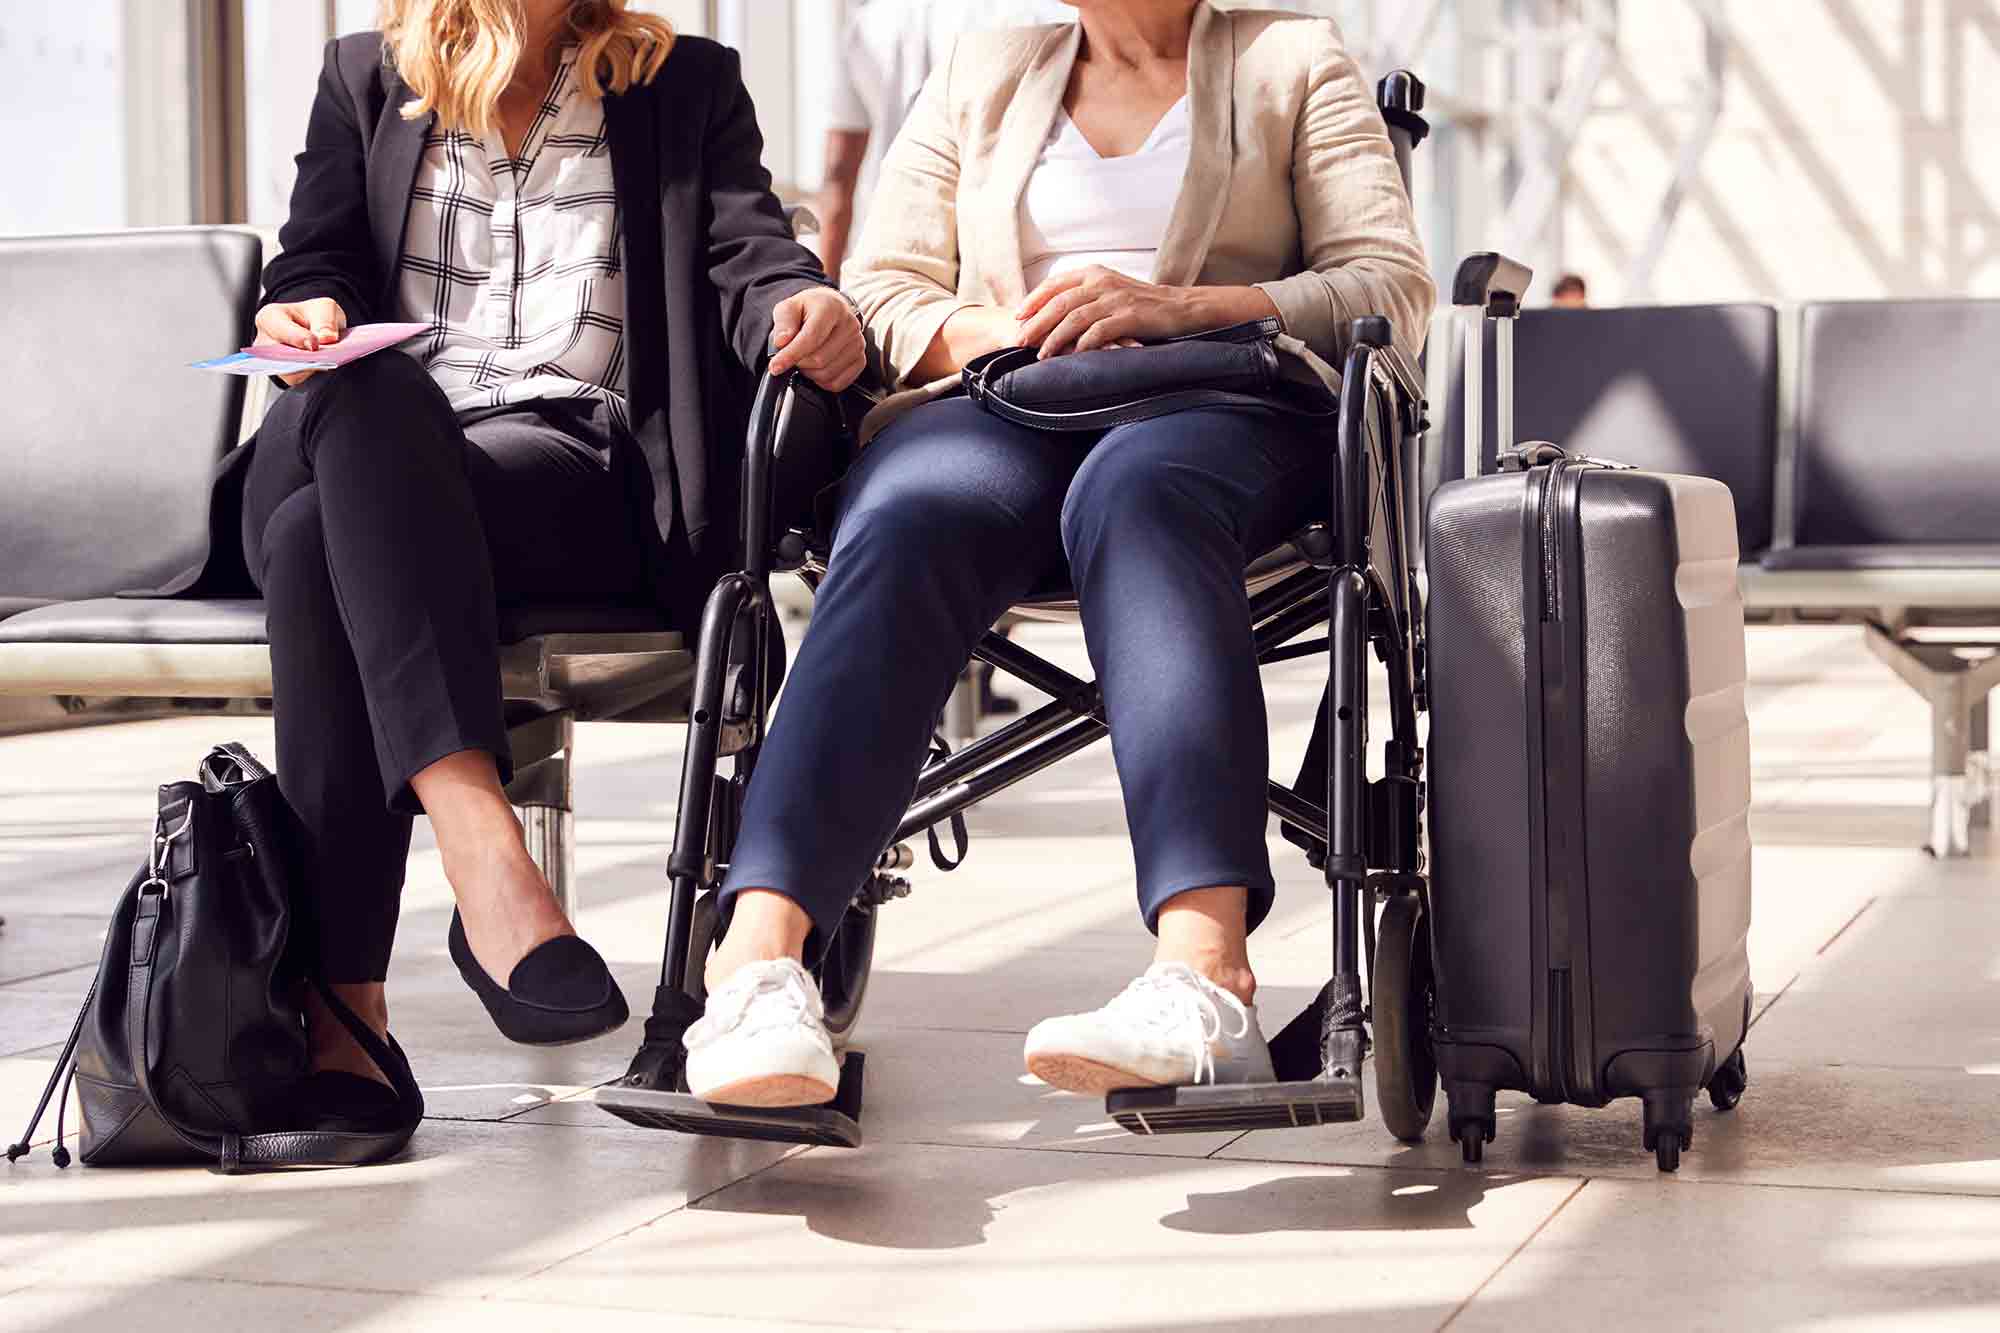 two women sitting in airport one in a wheelchair personal care assistant